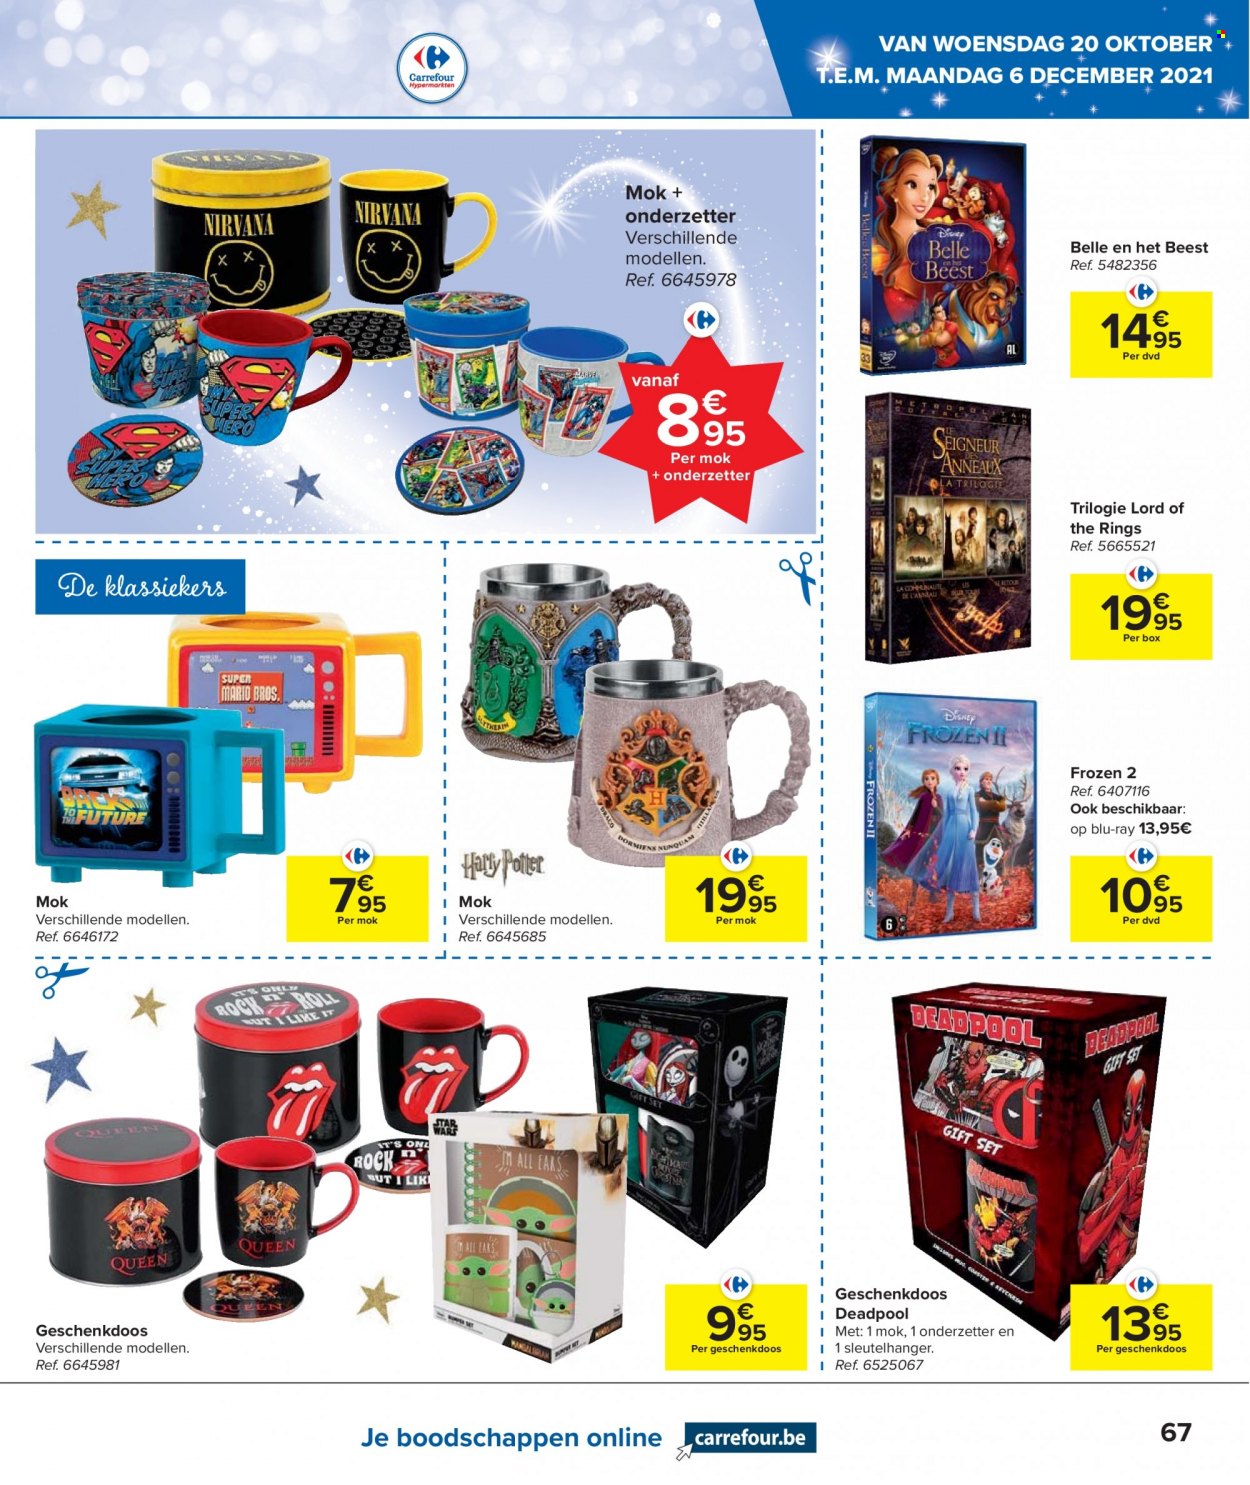 Catalogue Carrefour hypermarkt - 20.10.2021 - 6.12.2021. Page 67.